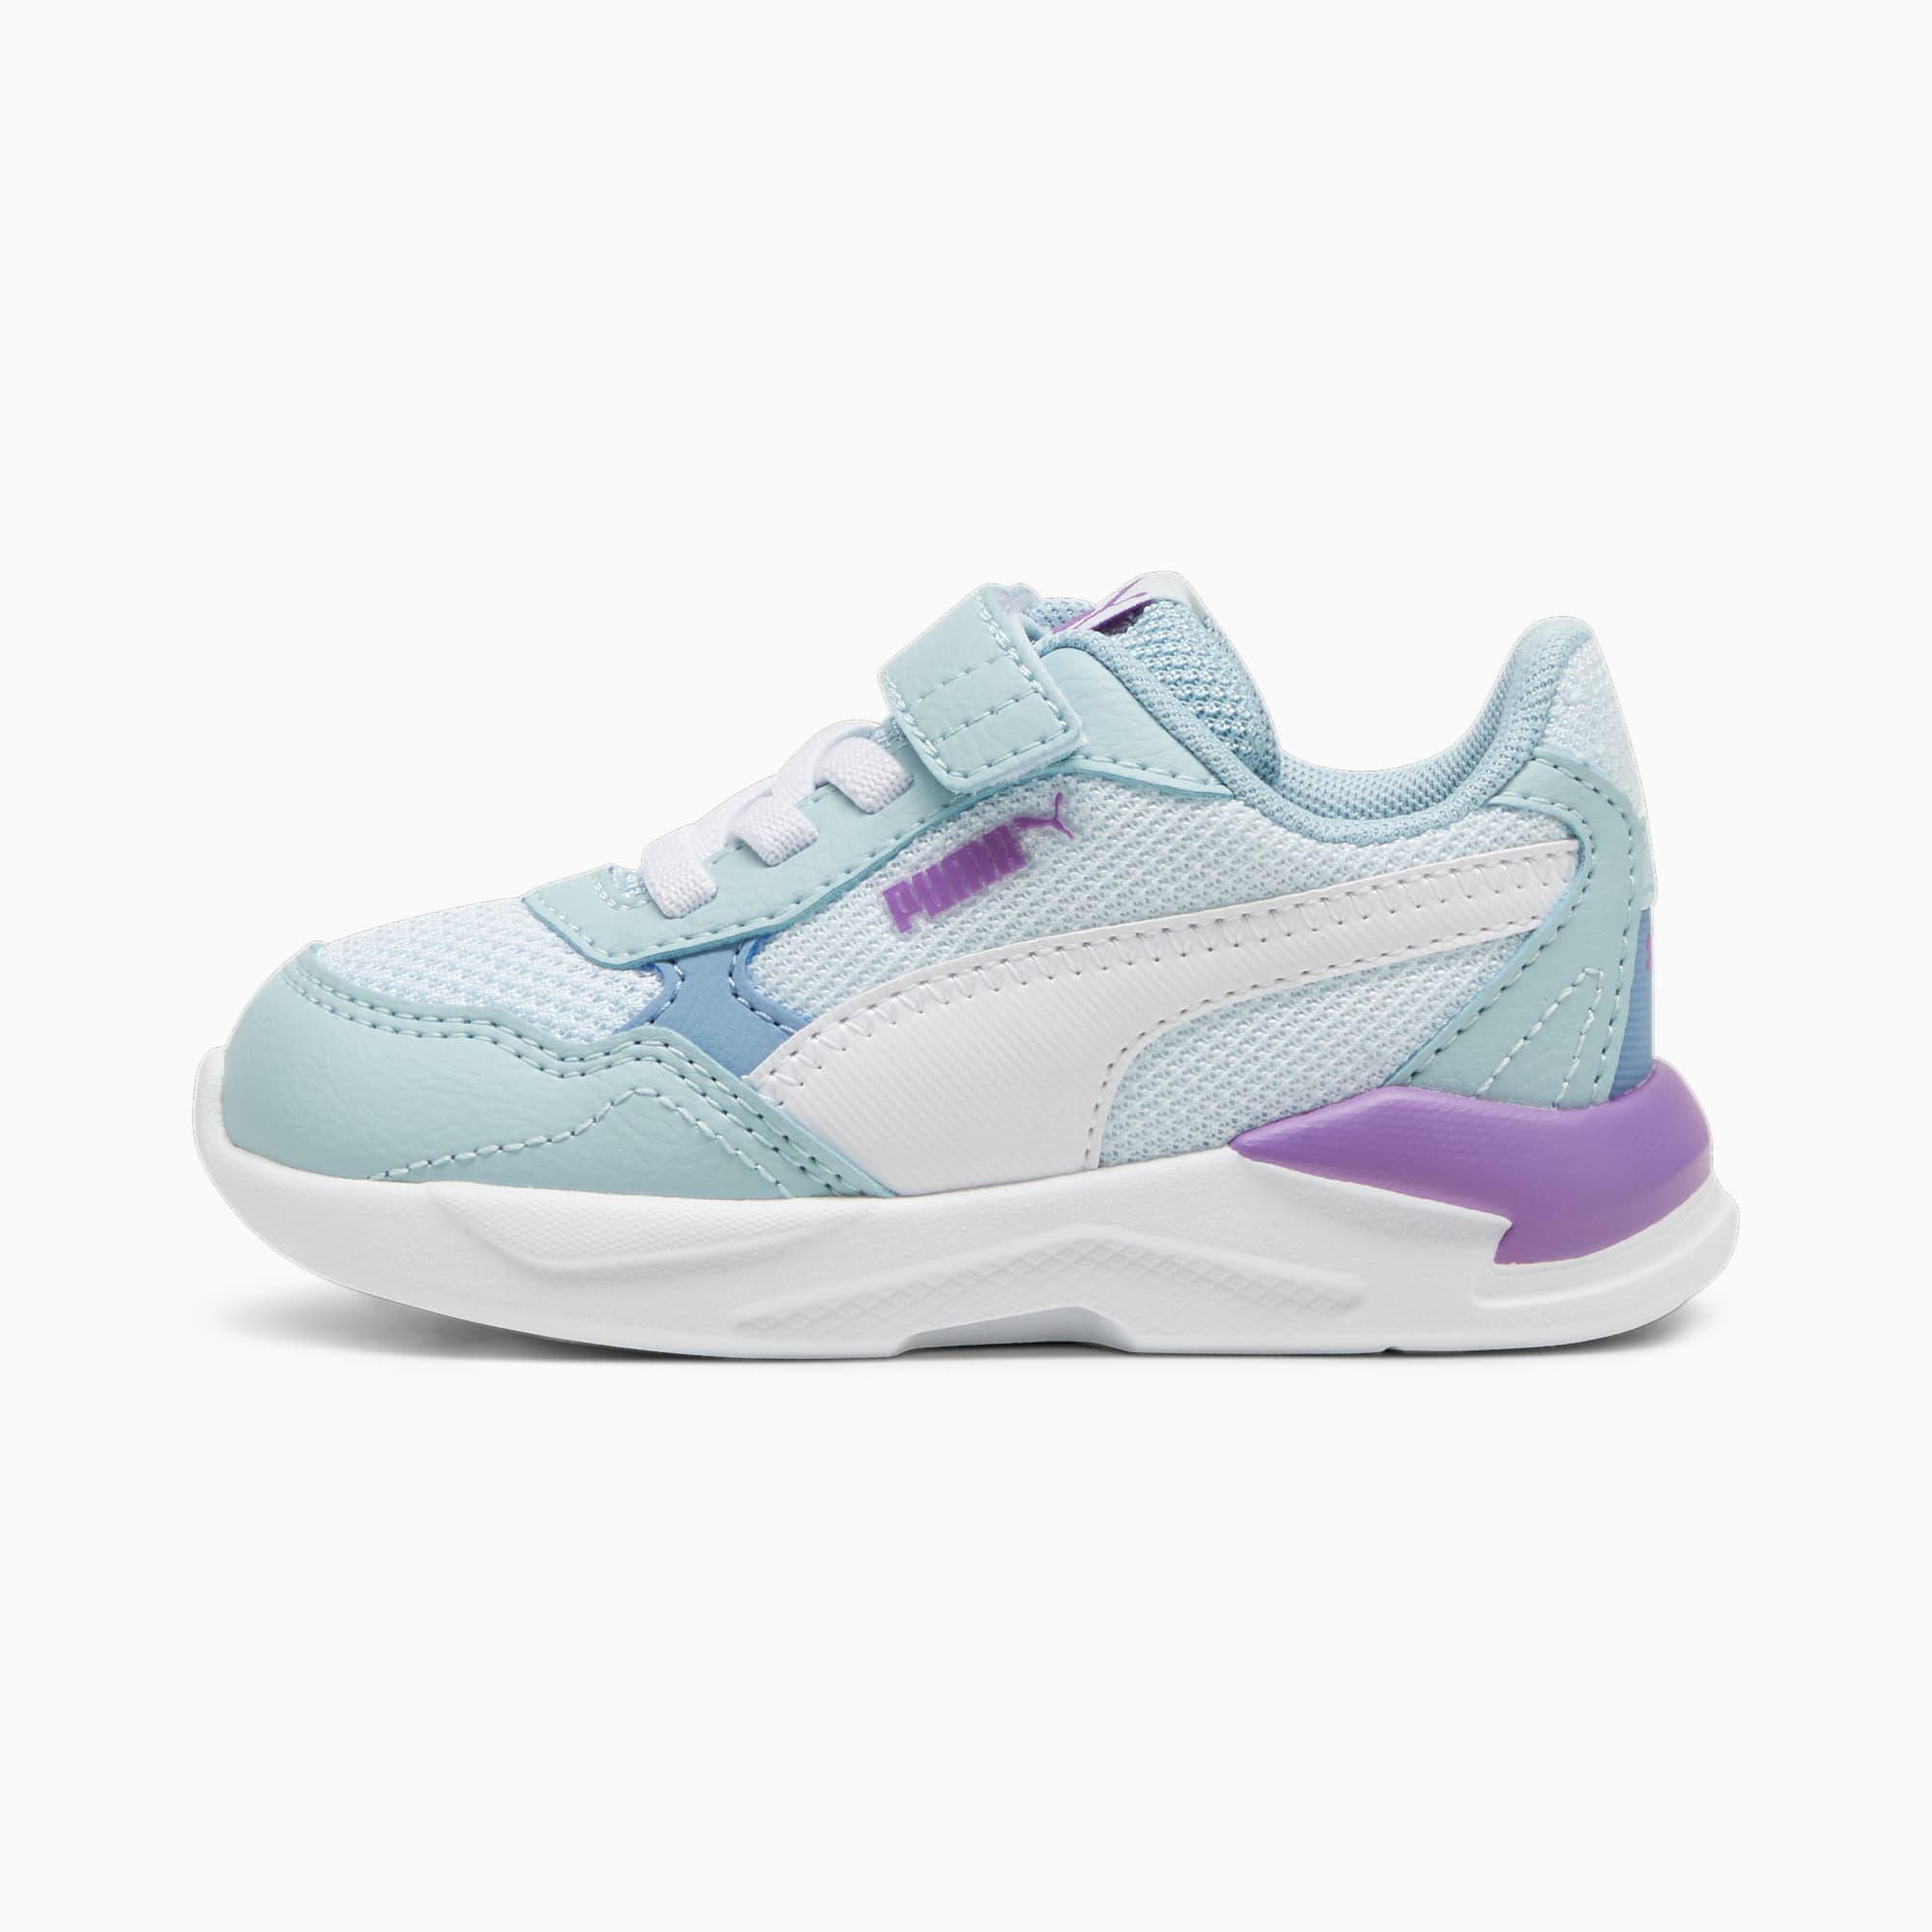 PUMA X-Ray Speed Lite AC Babies' Trainers, Dewdrop/White/Turquoise Surf, Size 19, Shoes